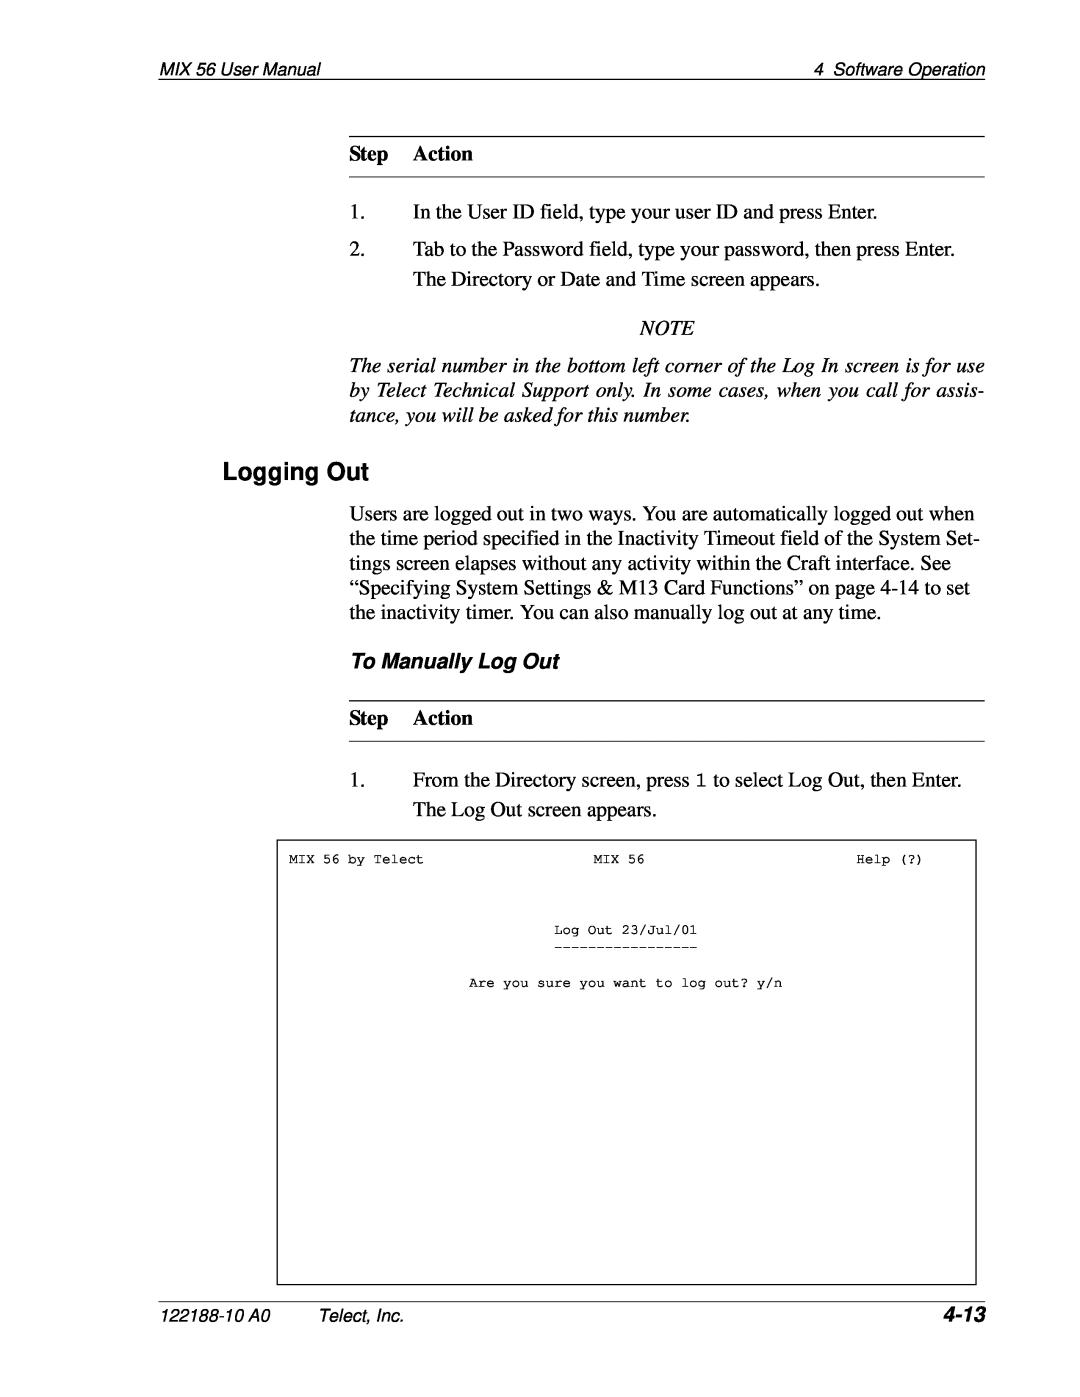 Telect MIX 56 user manual Logging Out, To Manually Log Out, 4-13, Step Action 